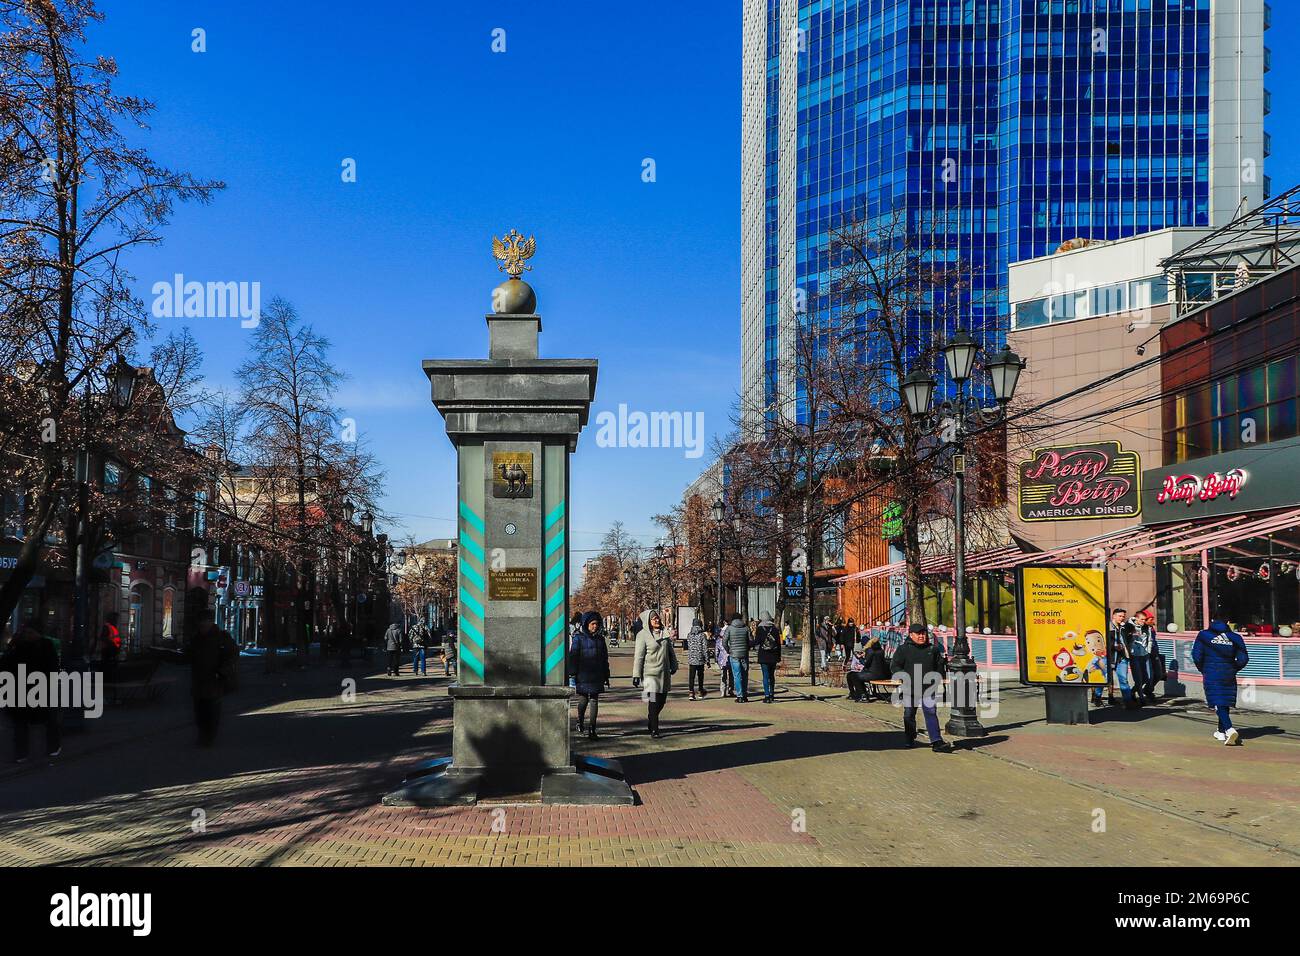 The monument Zero Mile of Chelyabinsk stands in the center of the city. The photo was taken in Chelyabinsk, Russia. Stock Photo